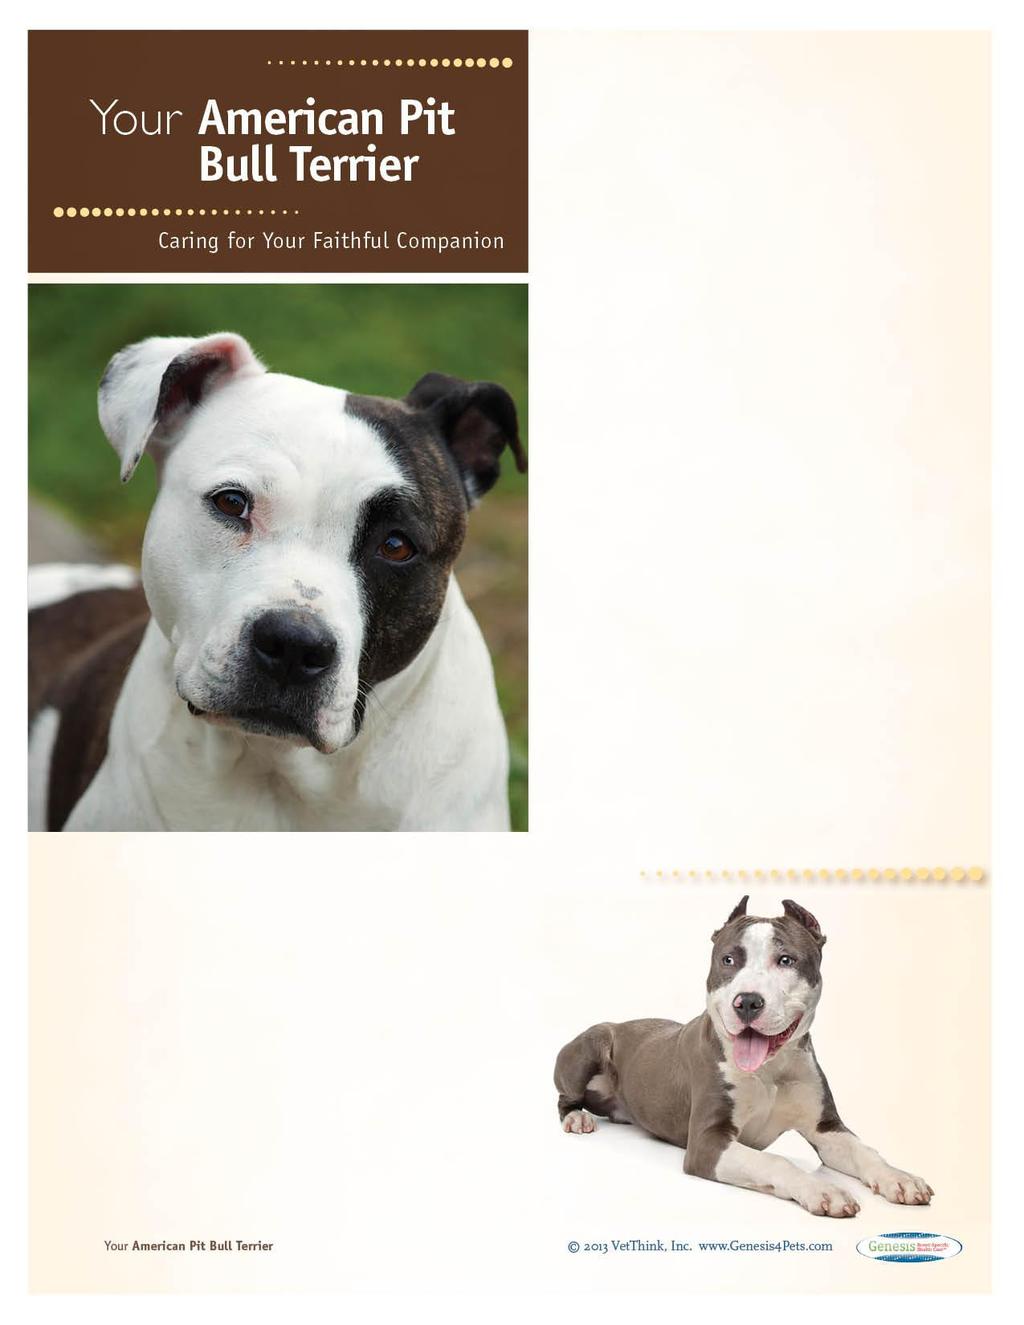 American Pit Bull Terriers: What a Unique Breed! Your dog is special! She's your best friend, companion, and a source of unconditional love.